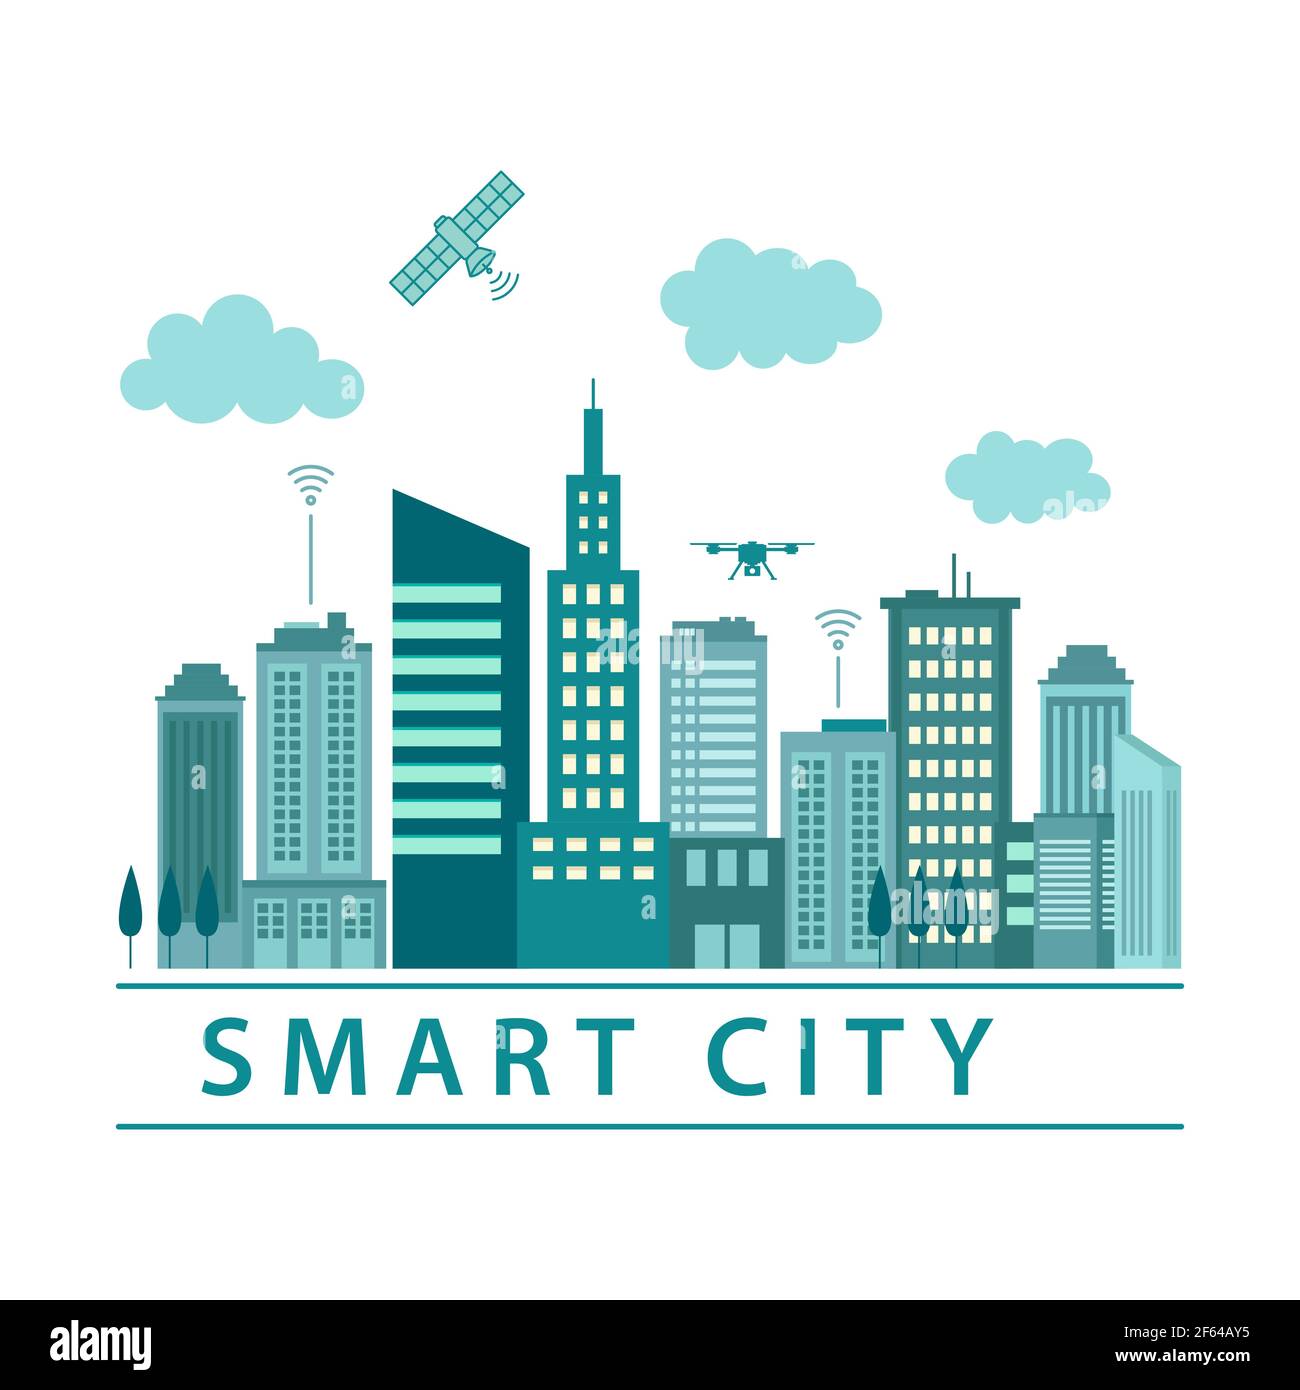 vector illustration of smart city with modern buildings Stock Vector